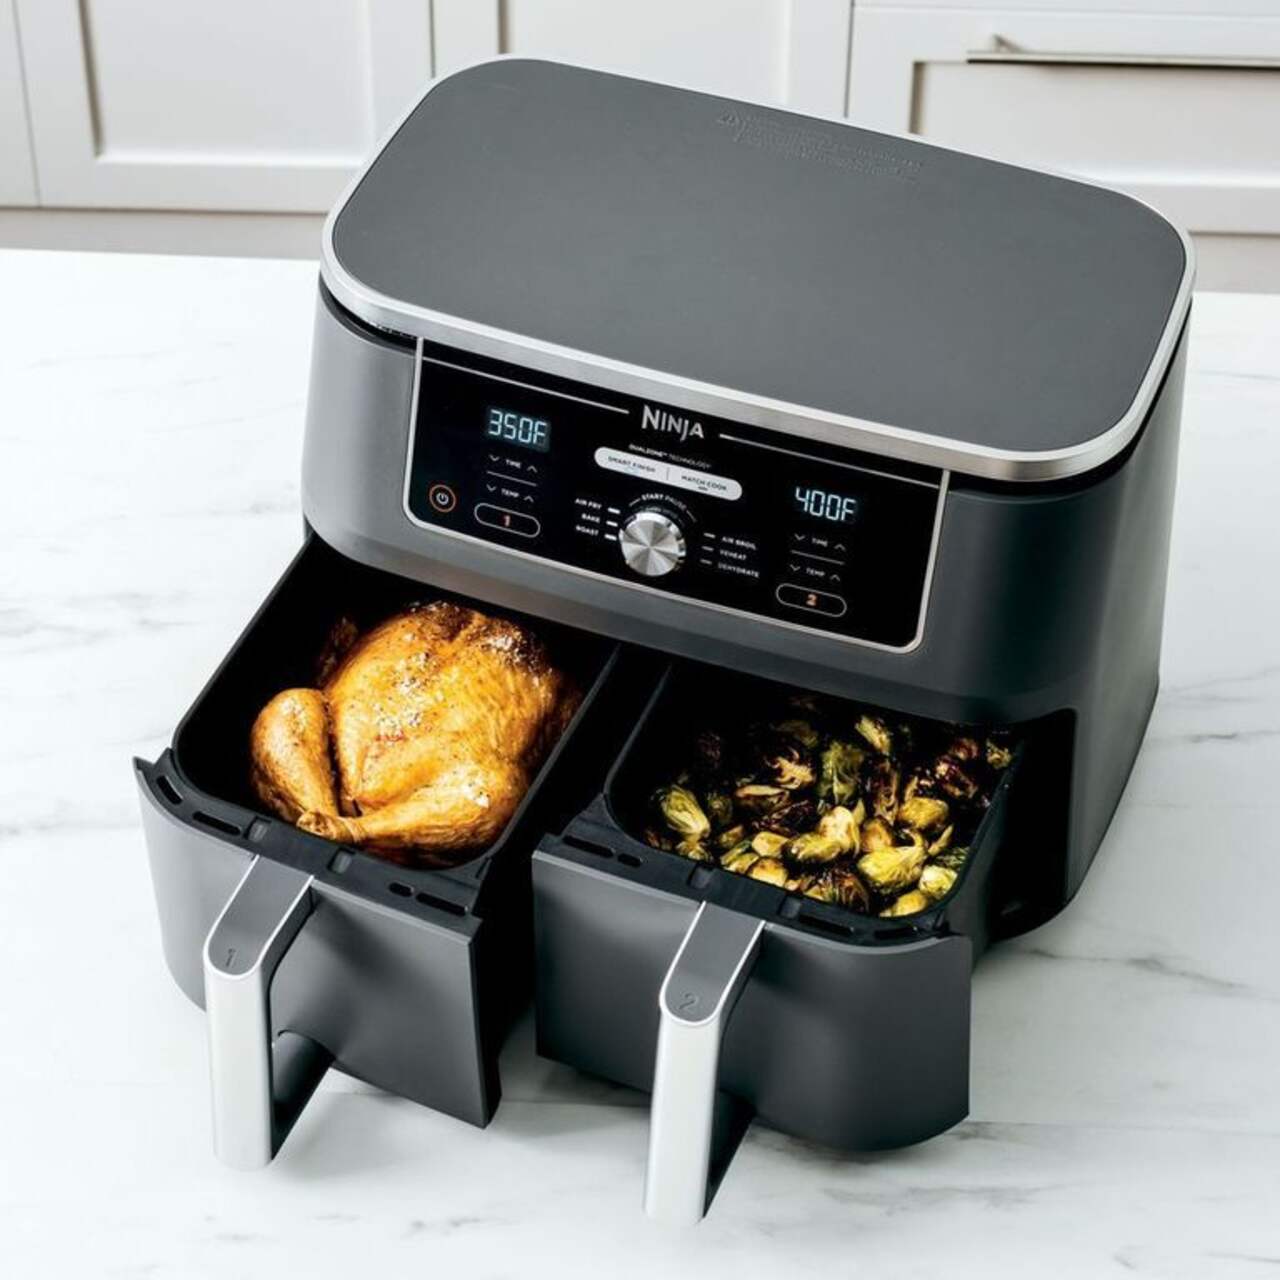 https://media-www.canadiantire.ca/product/living/kitchen/kitchen-appliances/0430955/ninja-foodi-xl-dual-zone-air-fryer-cc904dcc-deac-49b5-a4d7-1e16596a3dcb-jpgrendition.jpg?imdensity=1&imwidth=1244&impolicy=mZoom